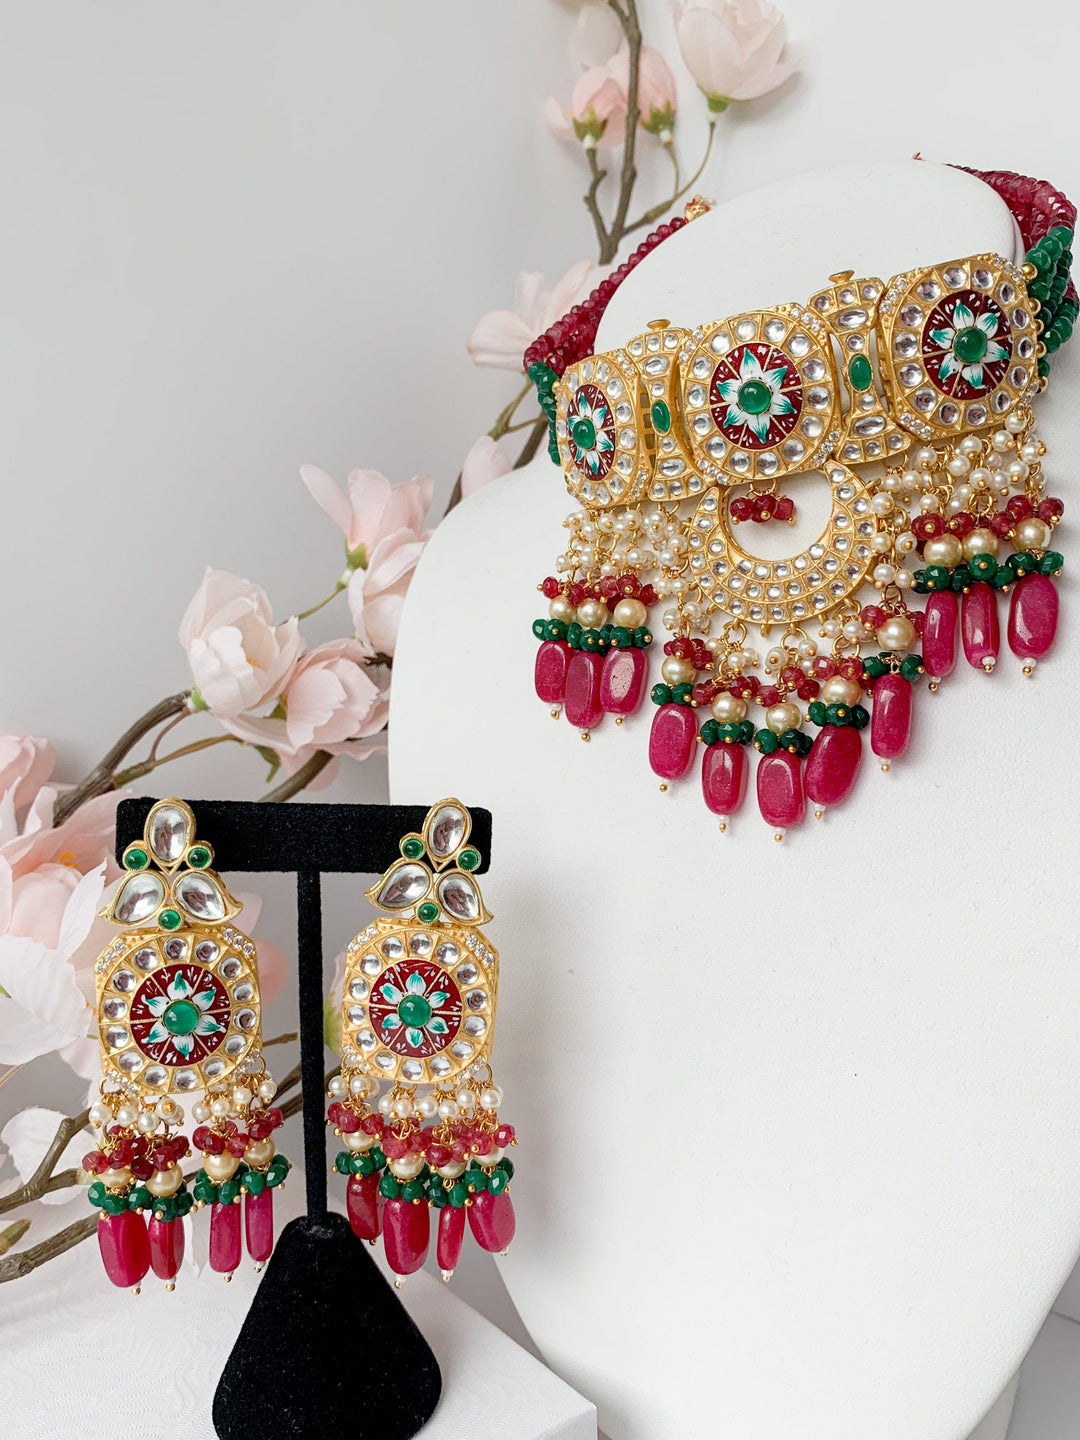 Resistance in Emerald & Ruby Necklace Sets THE KUNDAN SHOP 